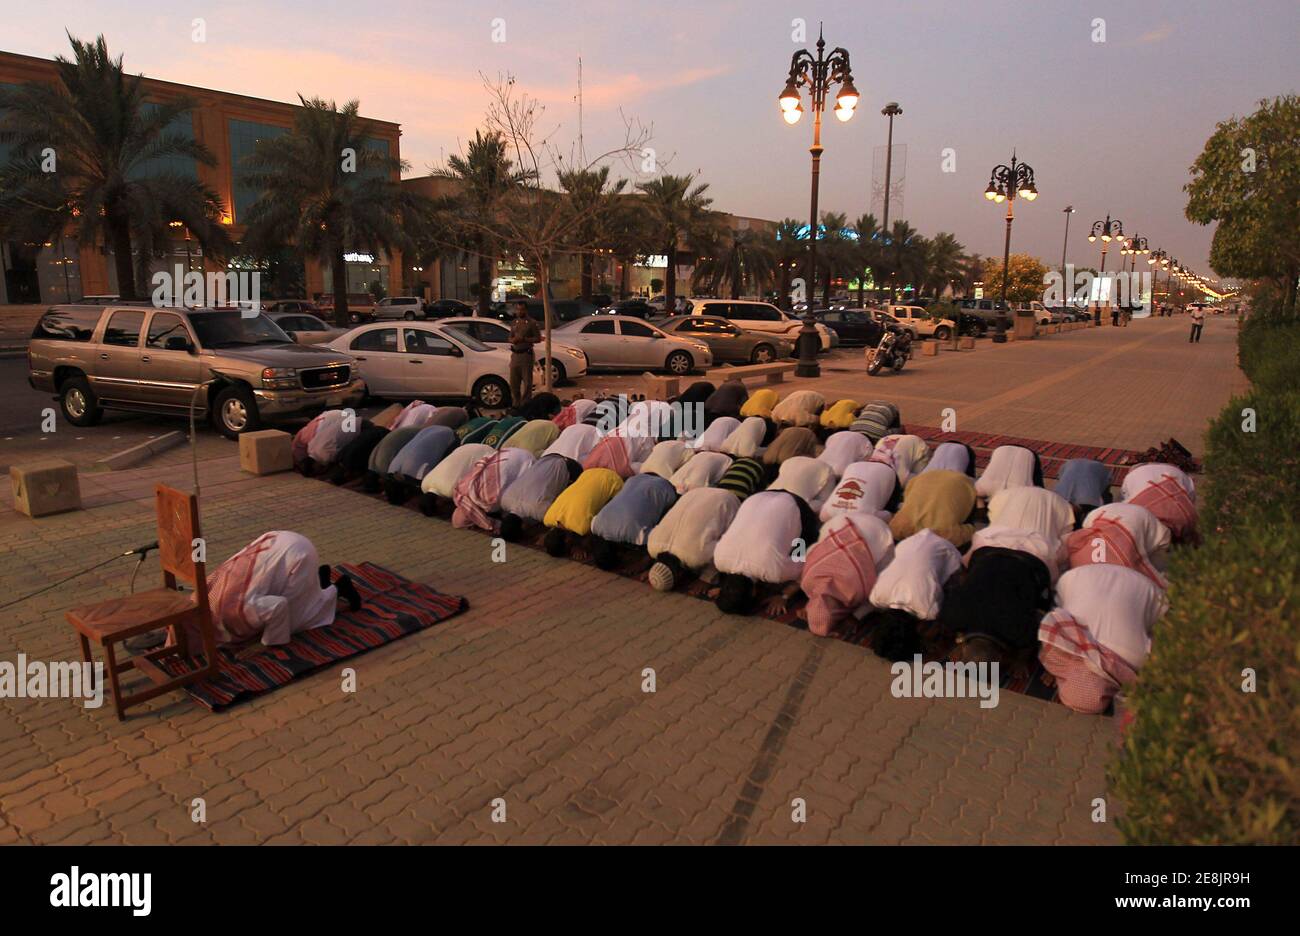 Members of the Committee for the Promotion of Virtue and Prevention of Vice, or religious police, perform dusk prayers with Saudi youth on the street outside coffee shops in Riyadh June 27, 2010. The men conducted the prayers during half-time of the World Cup soccer match between Germany and England, which they had been watching. The police have been ensuring that people watching World Cup soccer matches at the coffee shops continue to conduct their prayers during the duration of the soccer tournament. REUTERS/Fahad Shadeed (SAUDI ARABIA - Tags: SPORT SOCCER WORLD CUP RELIGION) Foto de stock